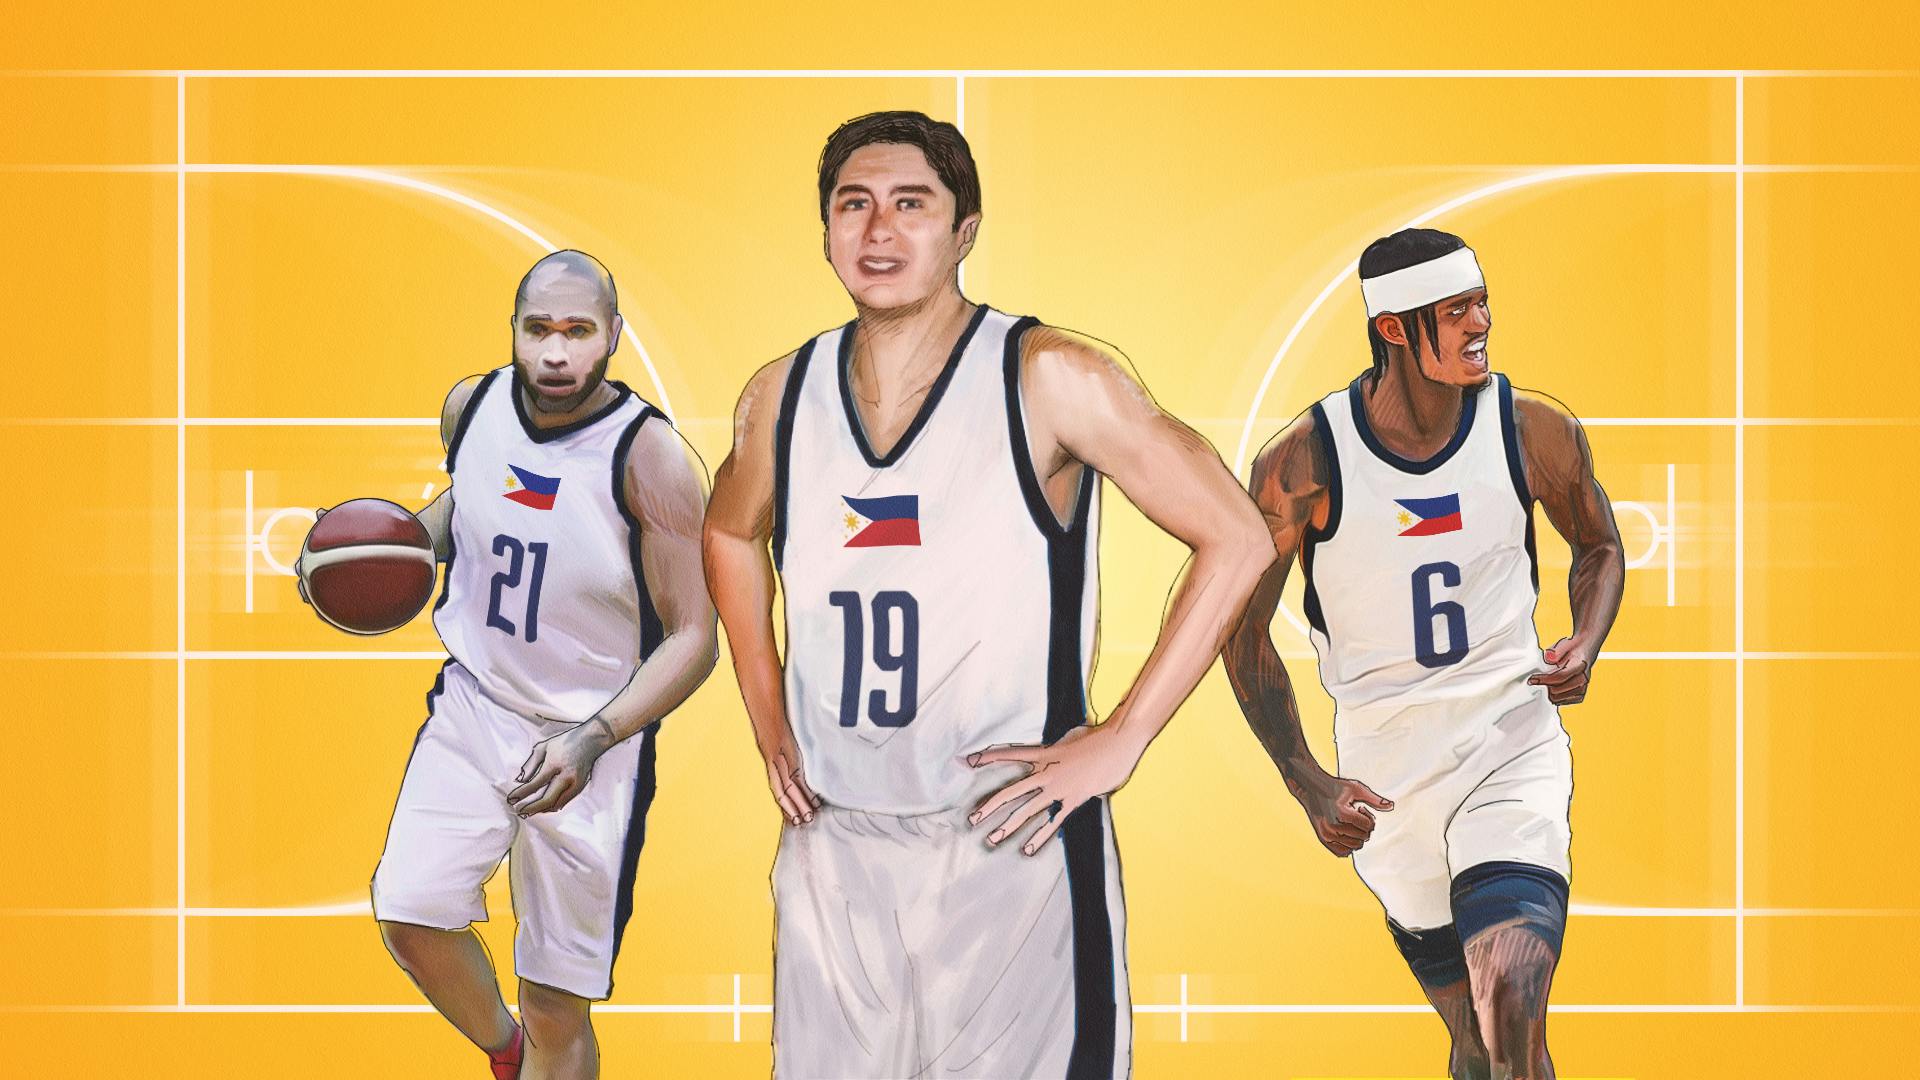 Laban lang: Top players of Gilas Pilipinas in last five stints in Asian Games